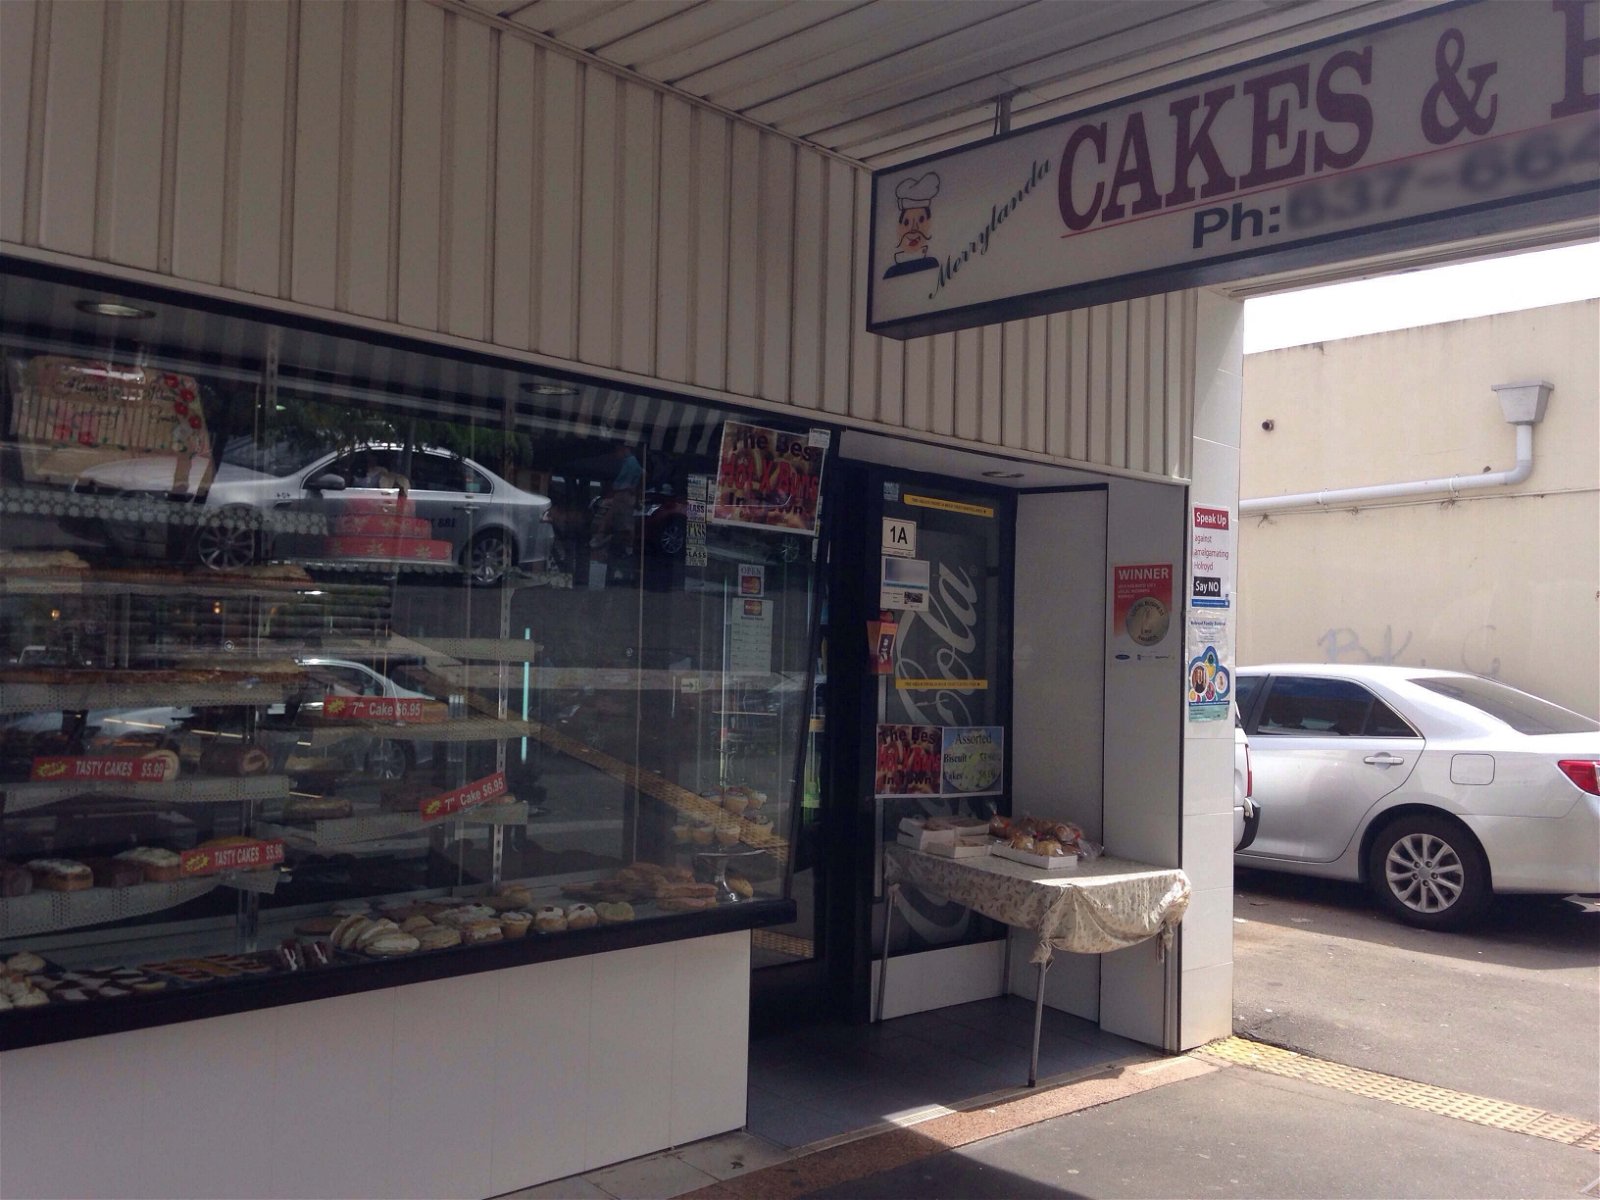 Merrylands Cakes & Pies - Accommodation Find 0